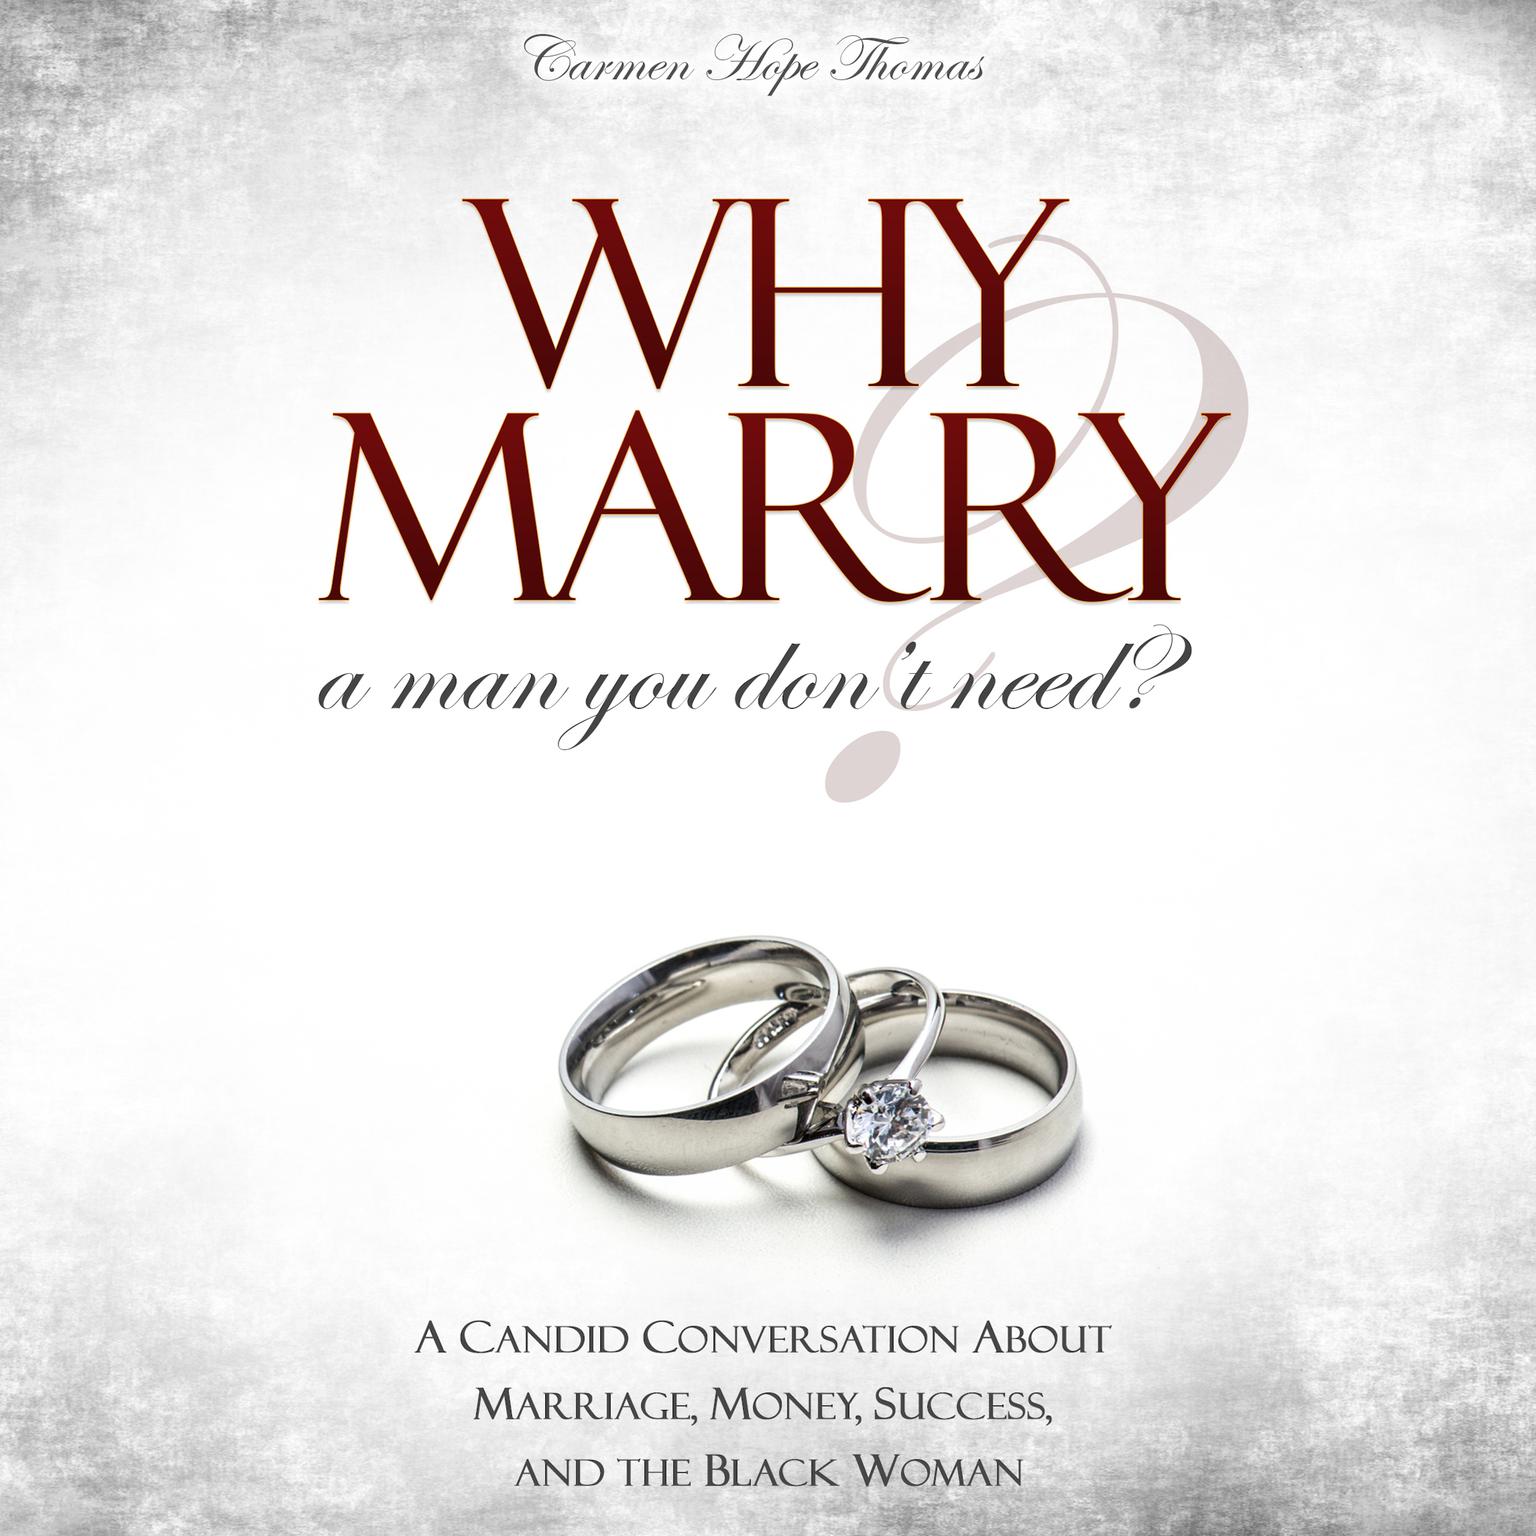 Why Marry a Man You Don’t Need?: A Candid Conversation About Marriage, Money, Success, and the Black Woman Audiobook, by Carmen Hope Thomas